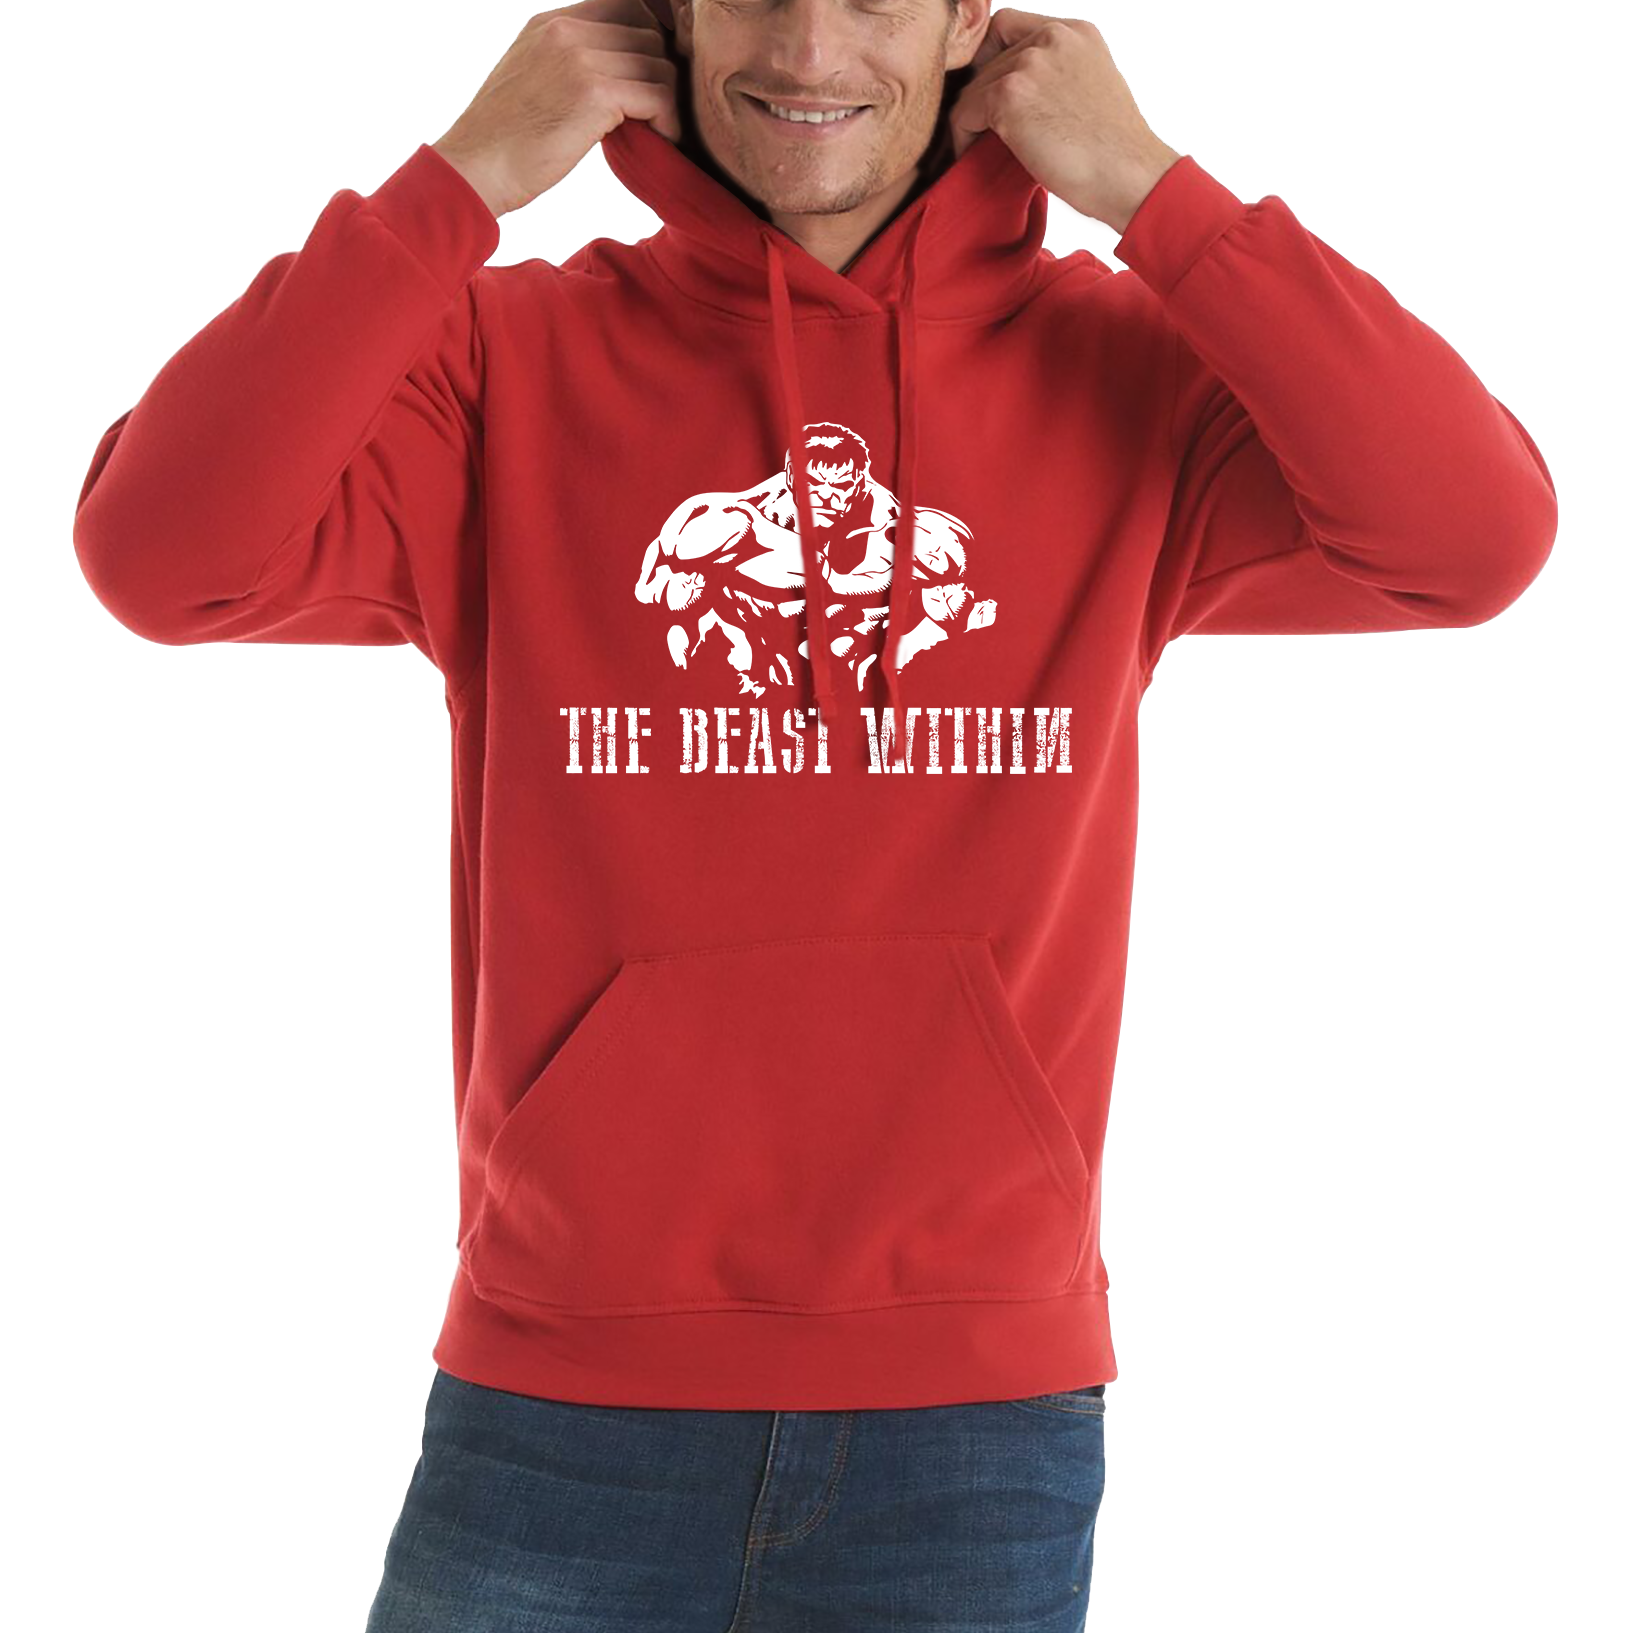 The Beast Within Hulk Bodybuilding Gym Workout Fitness Gym Training Adult Hoodie